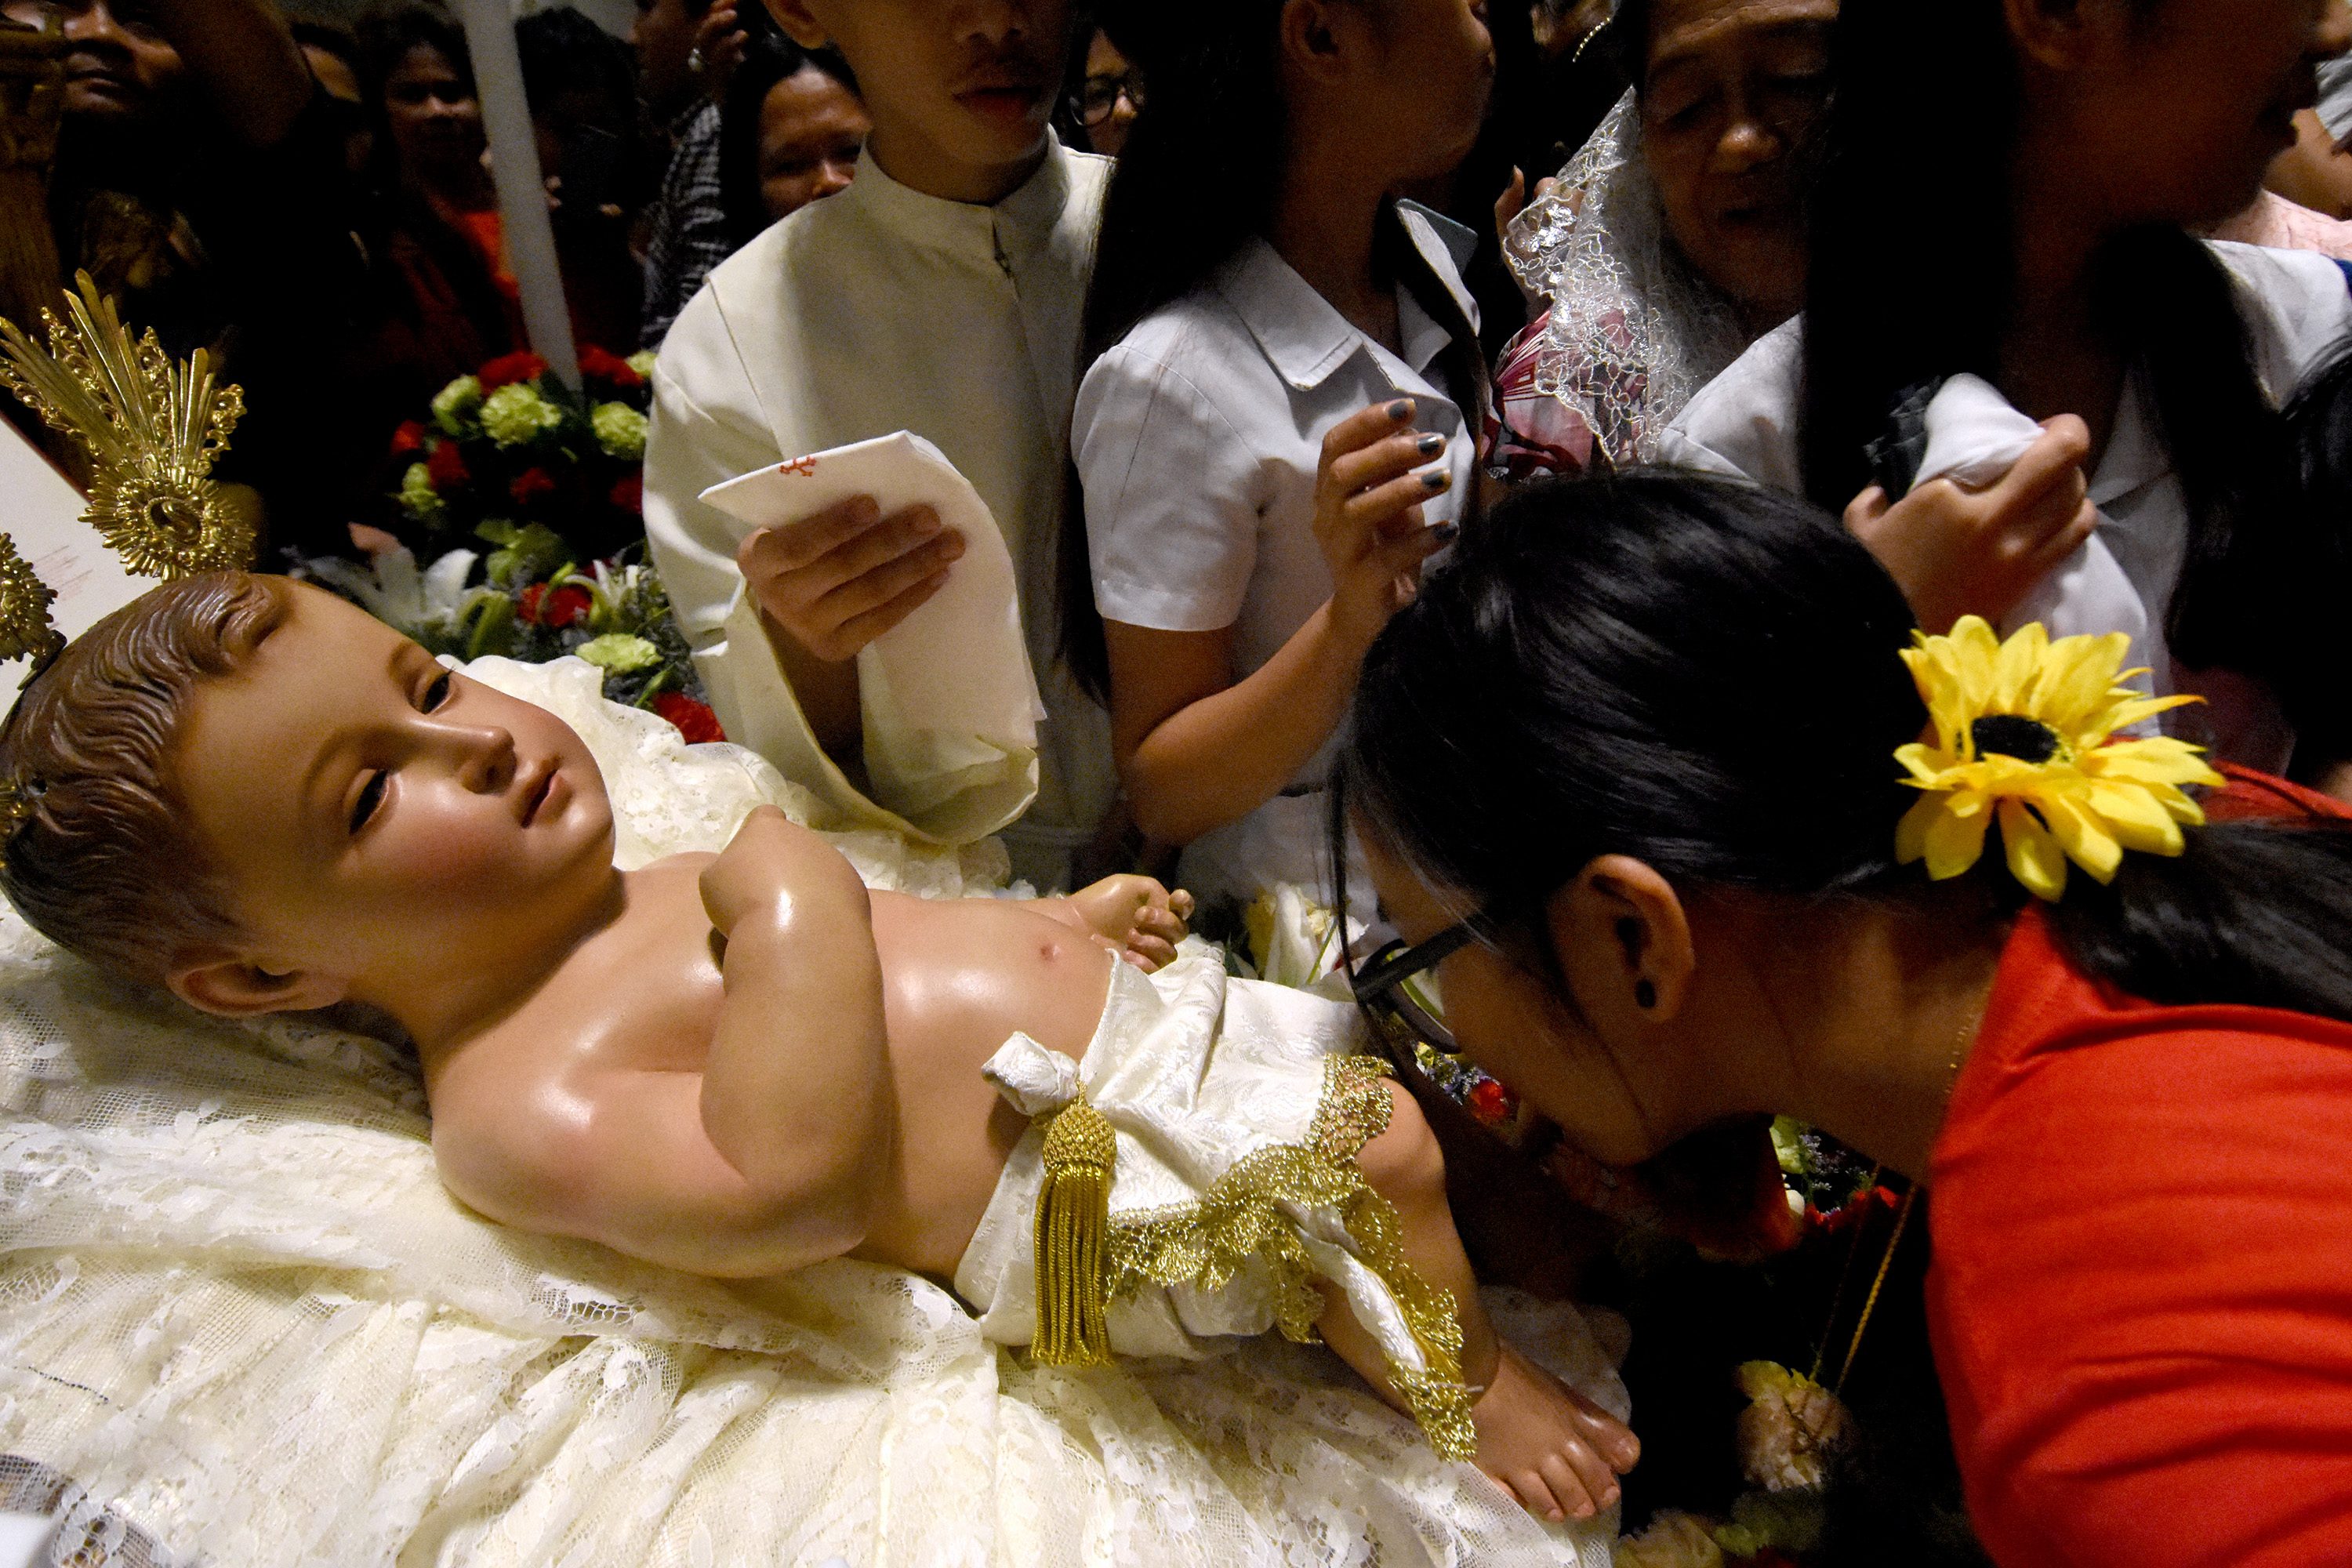 JOY, GOODWILL. Catholics line up to kiss the image of the Baby Jesus during the Christmas Eve Mass at the Manila Cathedral on December 24, 2017. Photo by Angie de Silva/Rappler 